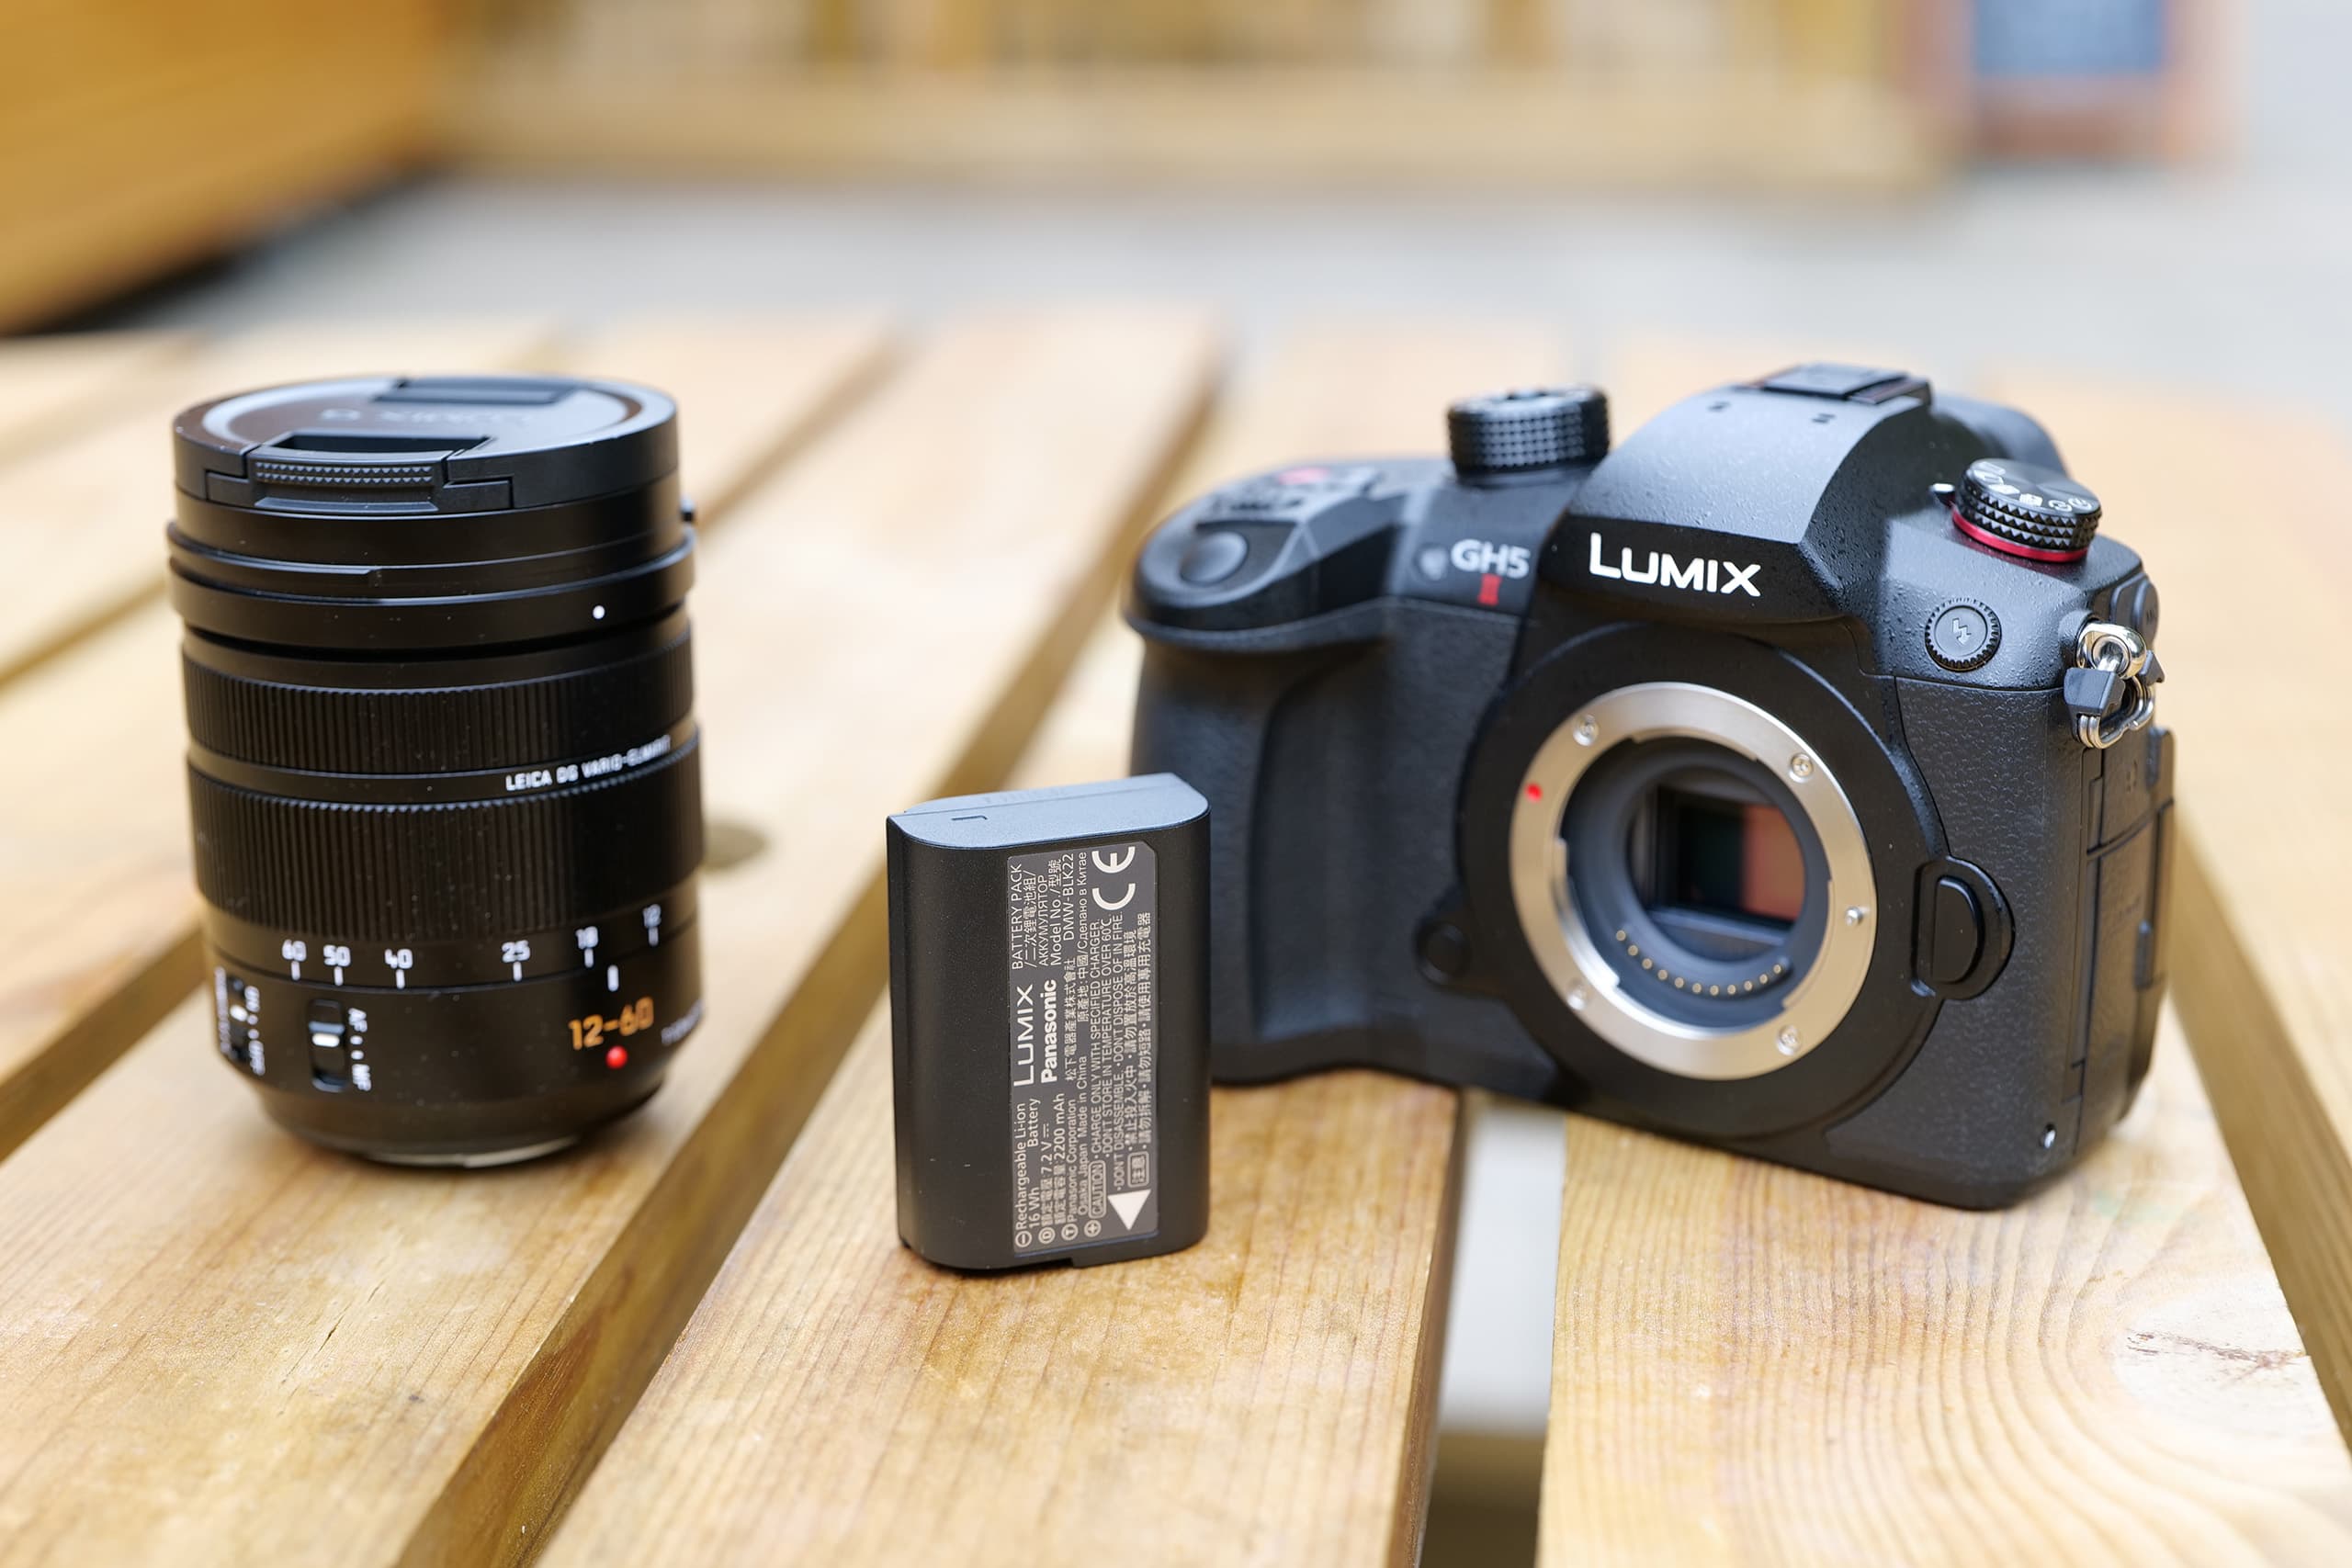 Panasonic Lumix GH5 II with lens and battery